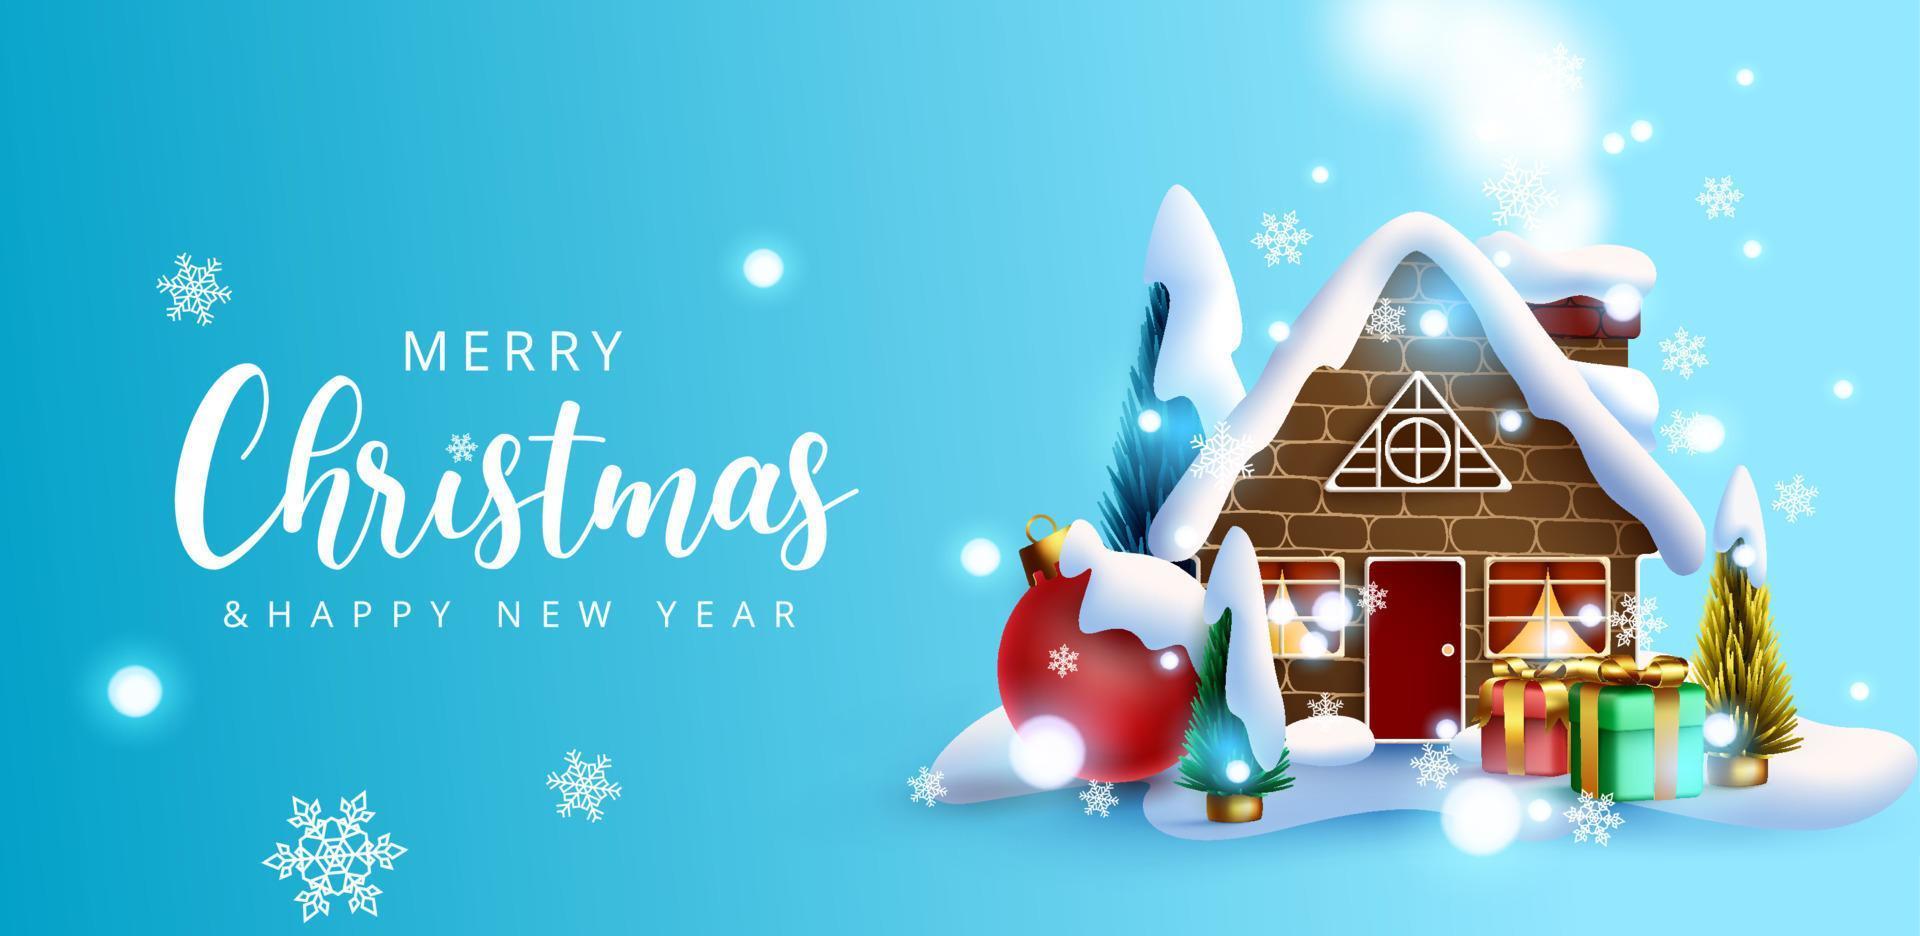 Christmas vector background design. Merry christmas greeting text ...